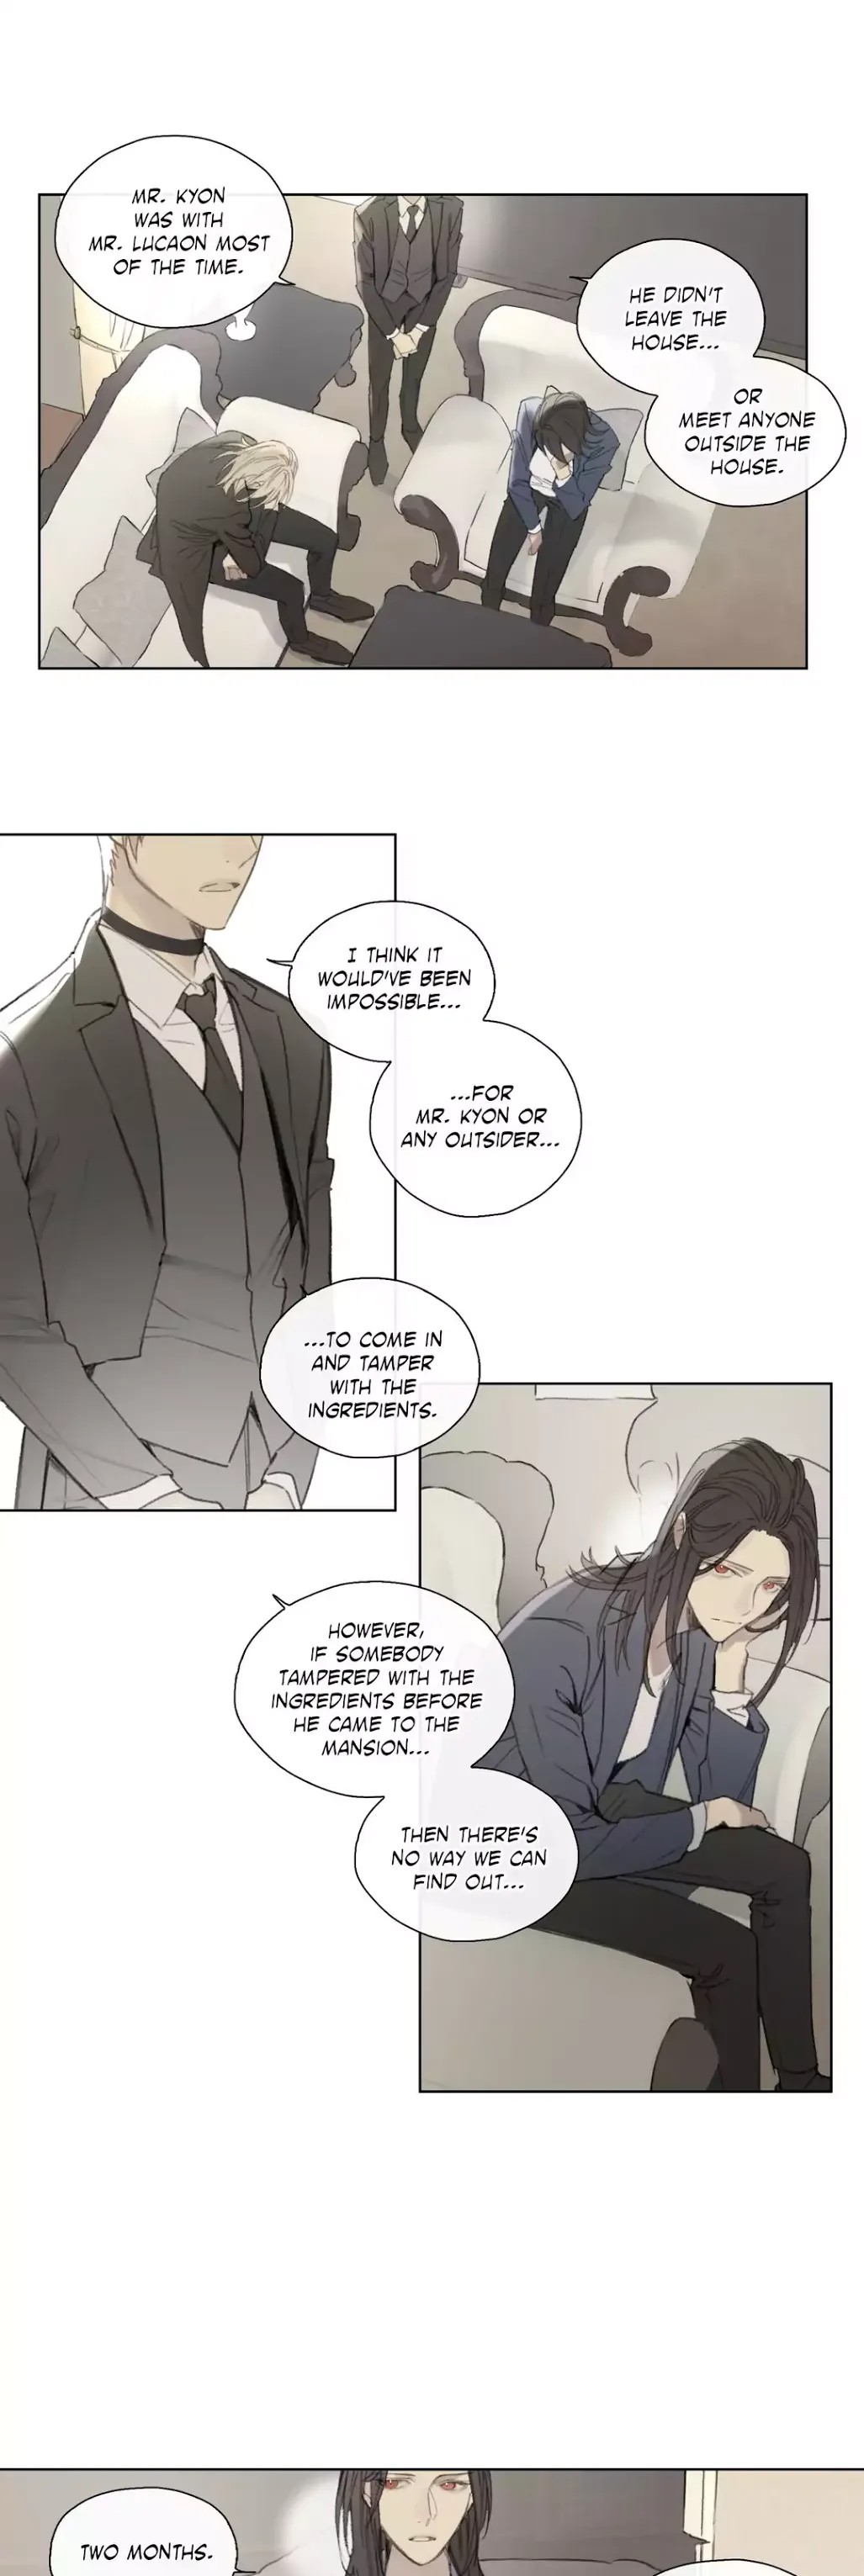 Royal Servant - Chapter 51 Page 4